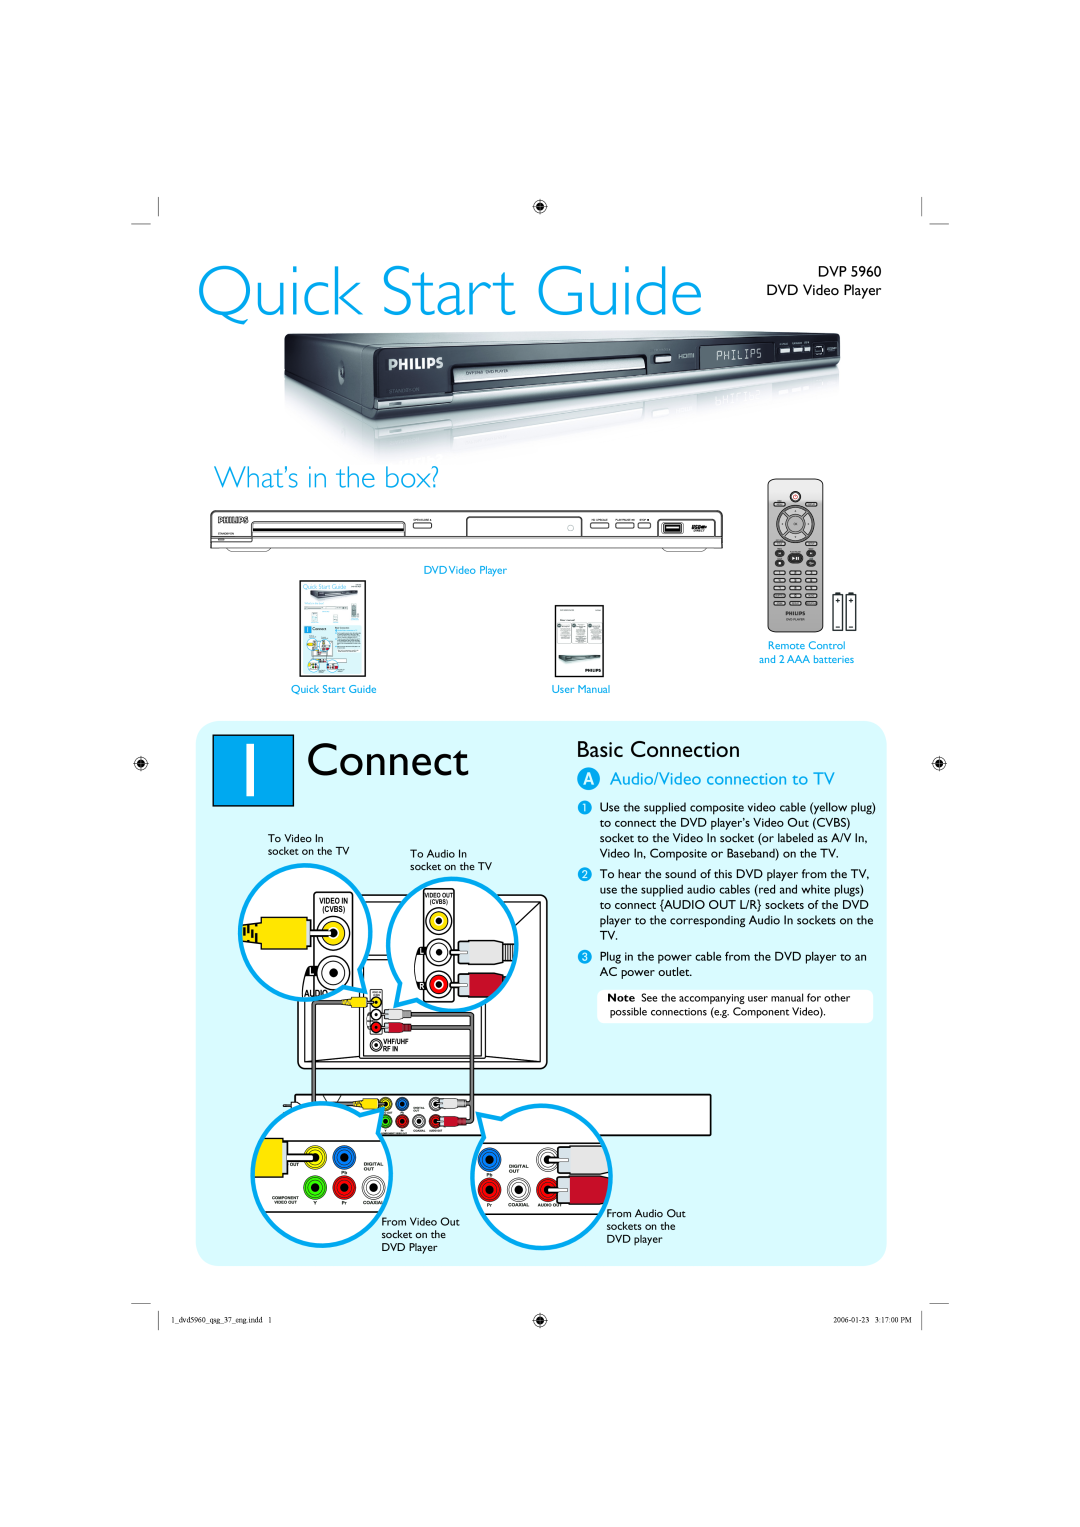 Philips quick start Connect, A Audio/Video connection to TV, DVP 5960 DVD Video Player, Quick Start Guide 